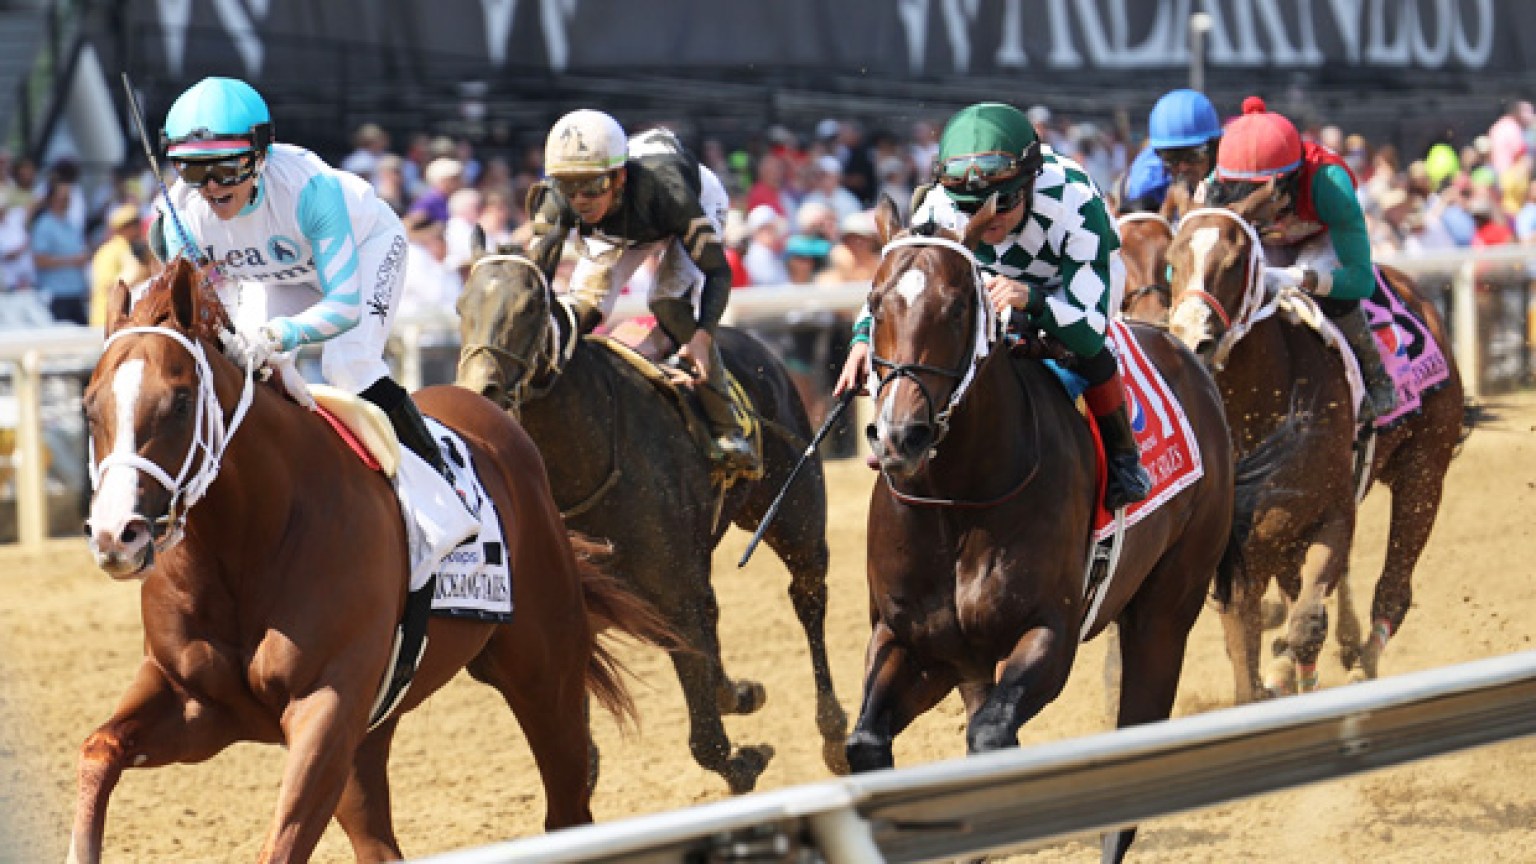 What Time Is The Kentucky Derby? Start Time, Odds, & More Info